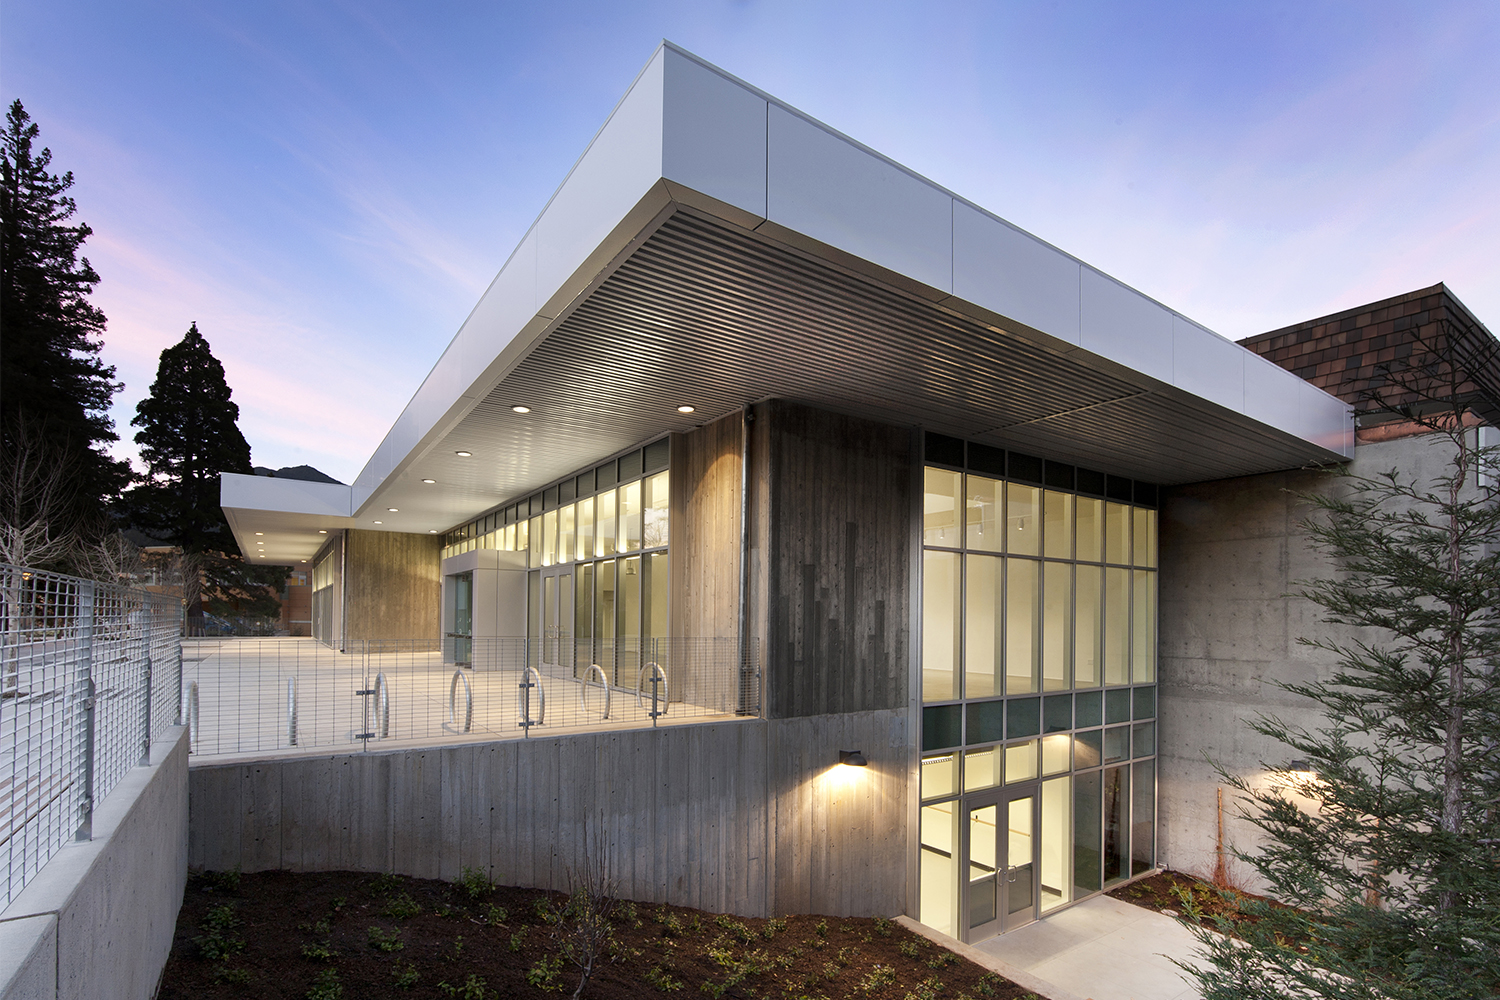 04_Projects_Community College Complex - Performing Arts Building.jpg